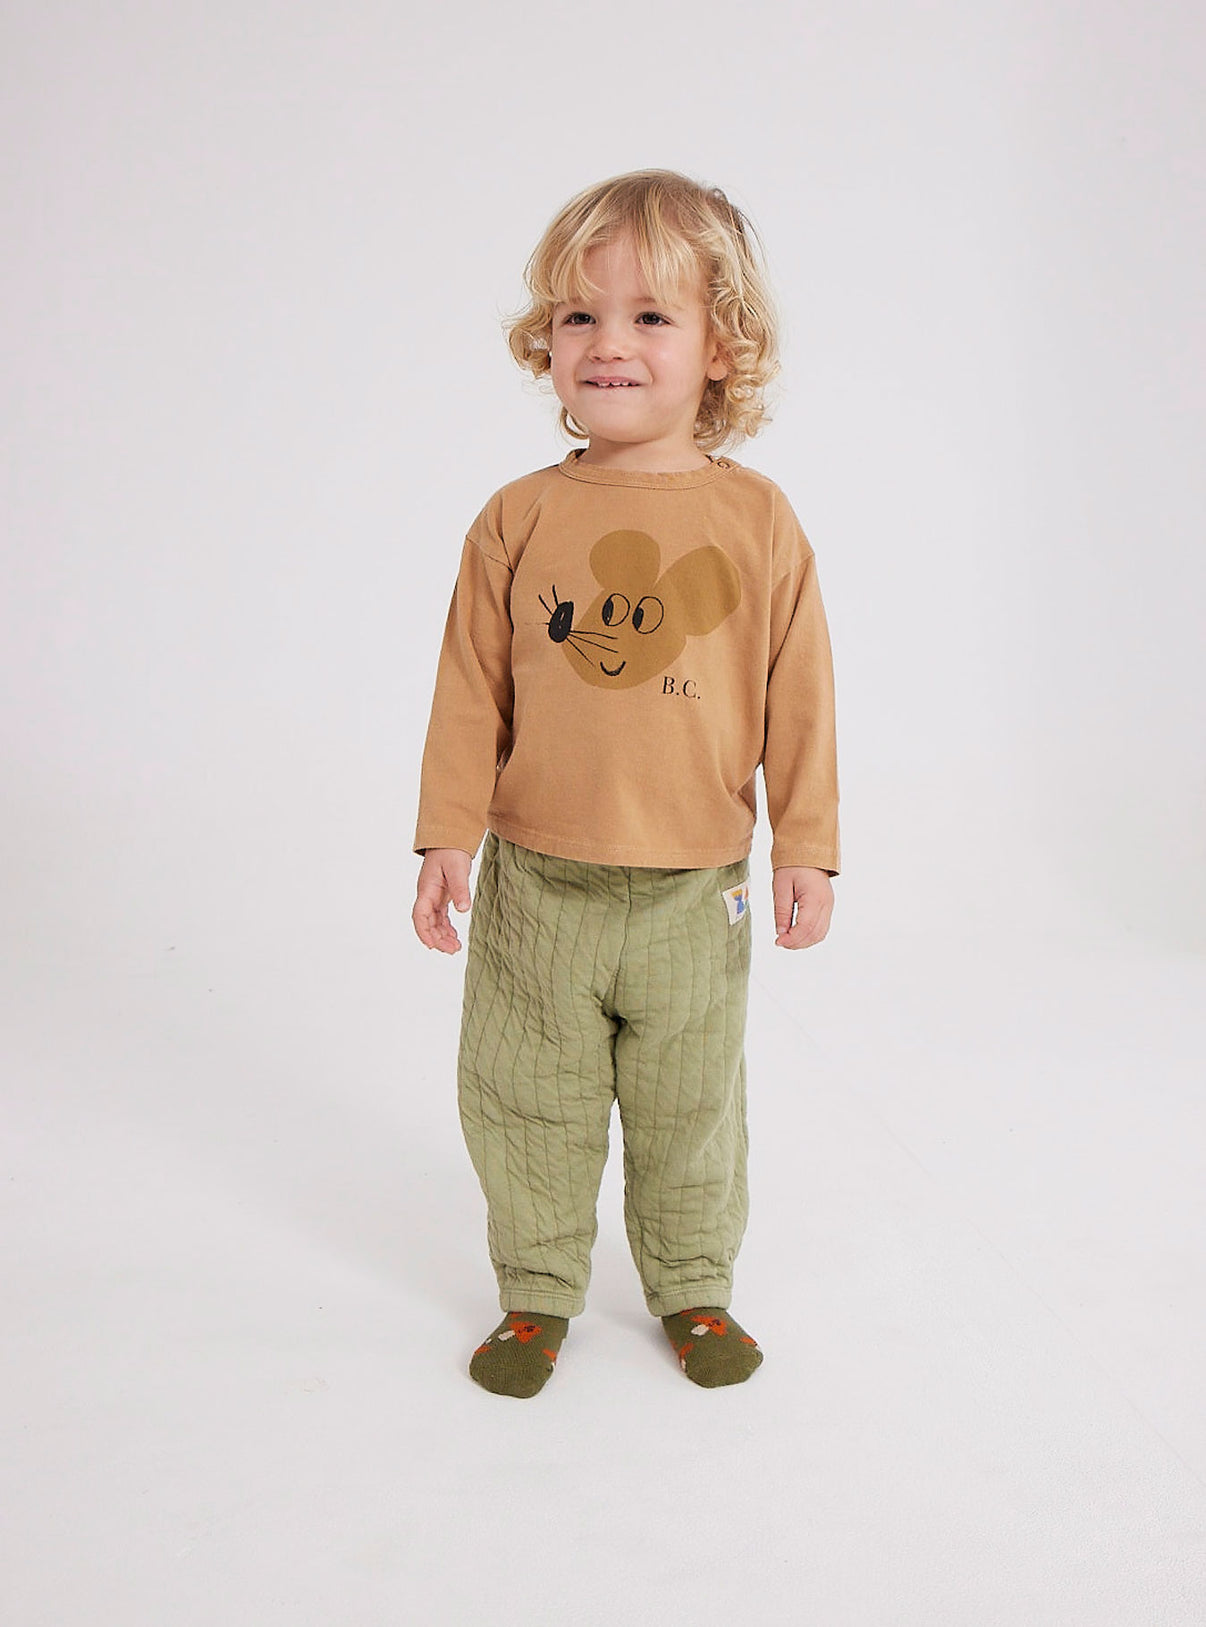 Bobo Choses Baby Quilted Jogging Pants - 78% cotton 22% polyester light green trousers. Designed with elasticated waistband, patch and lightly padded. It has a baggy fit. Made in Portugal.